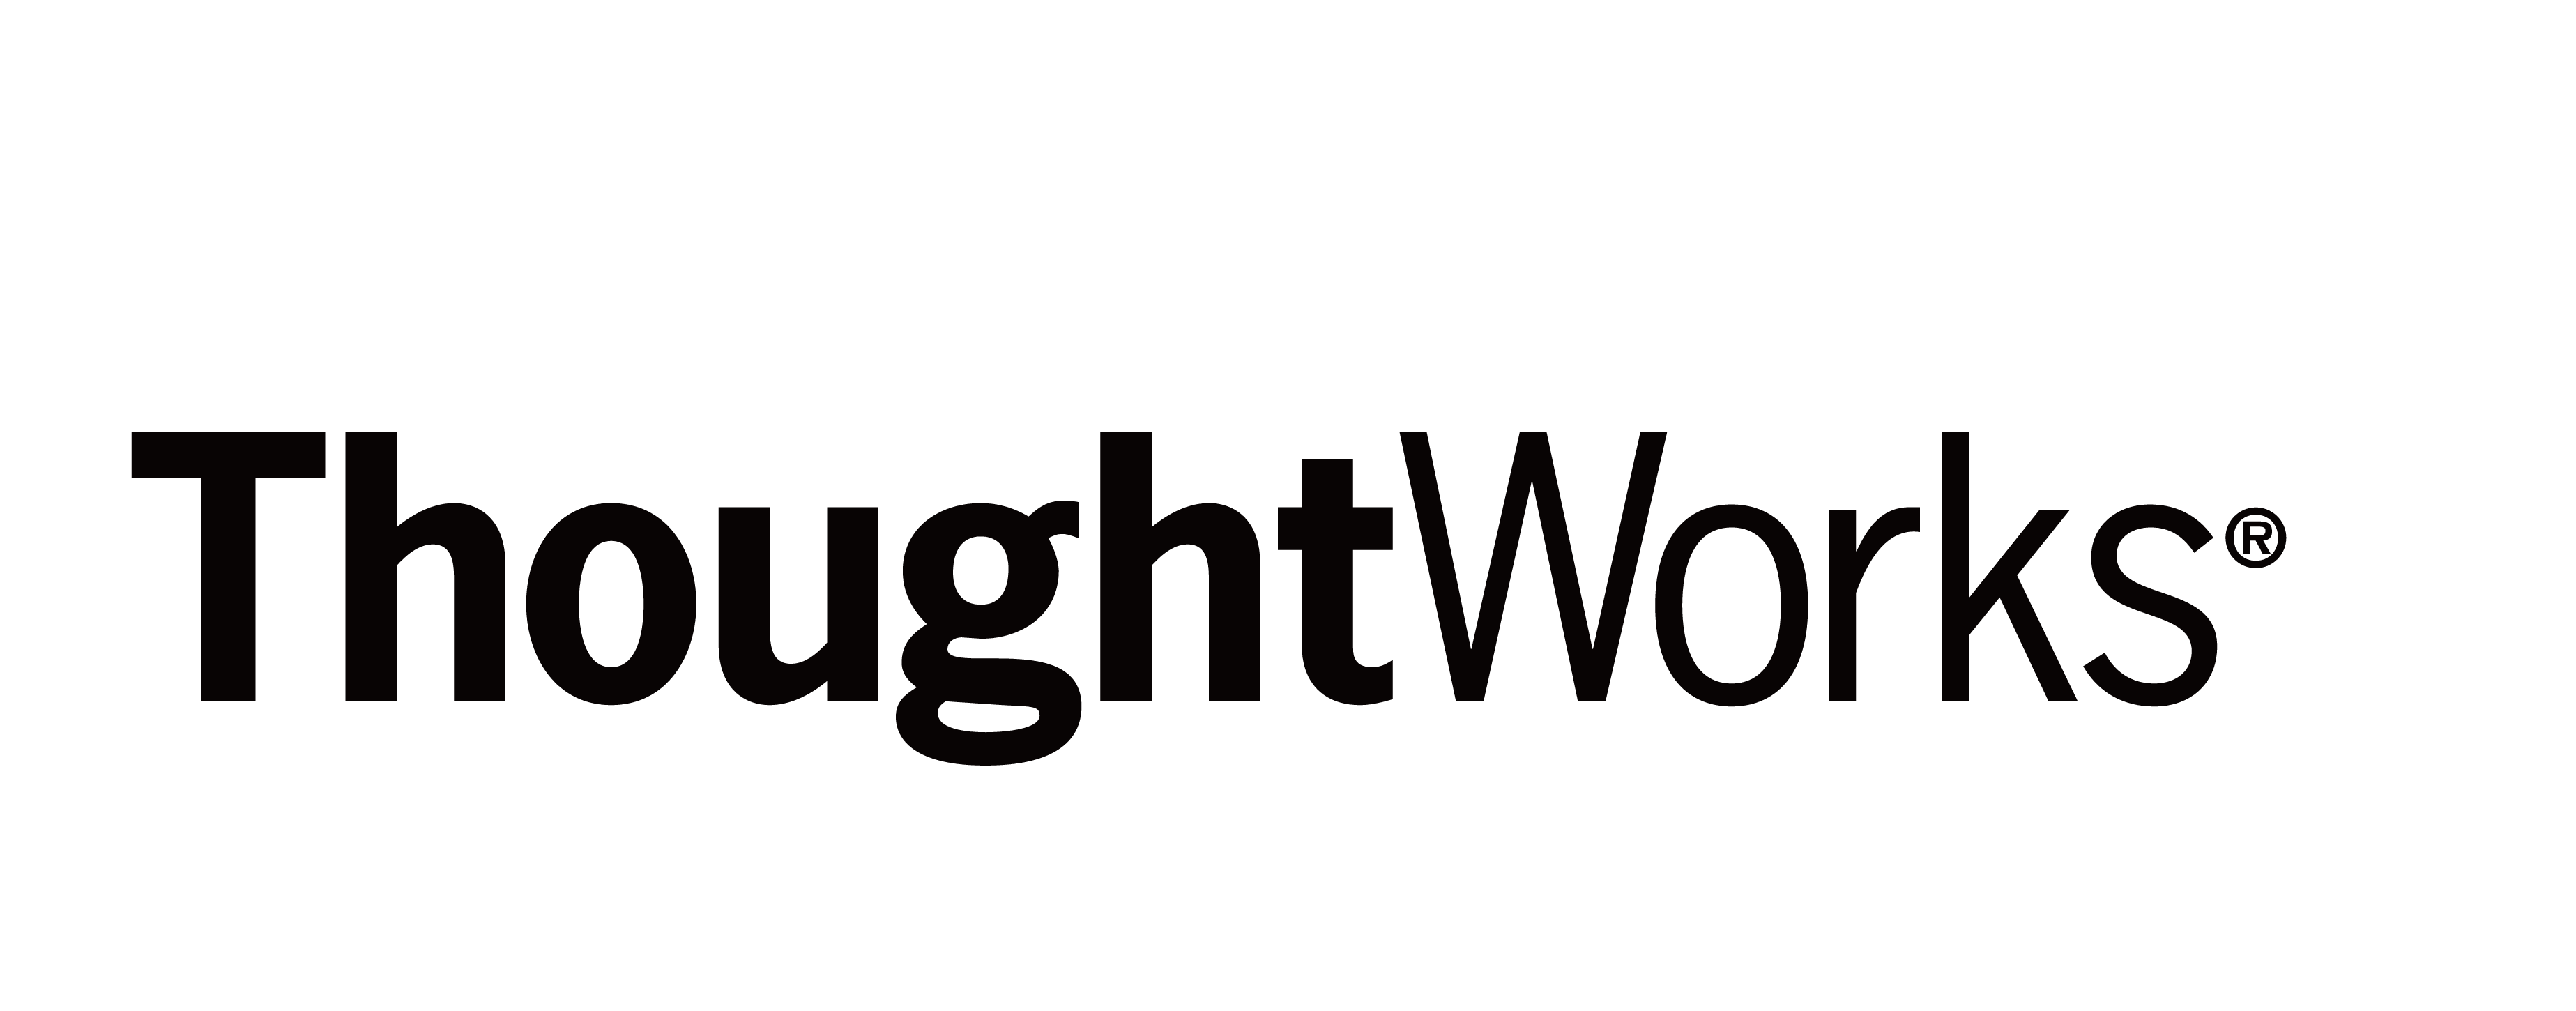 thoughtworks - 百格活动